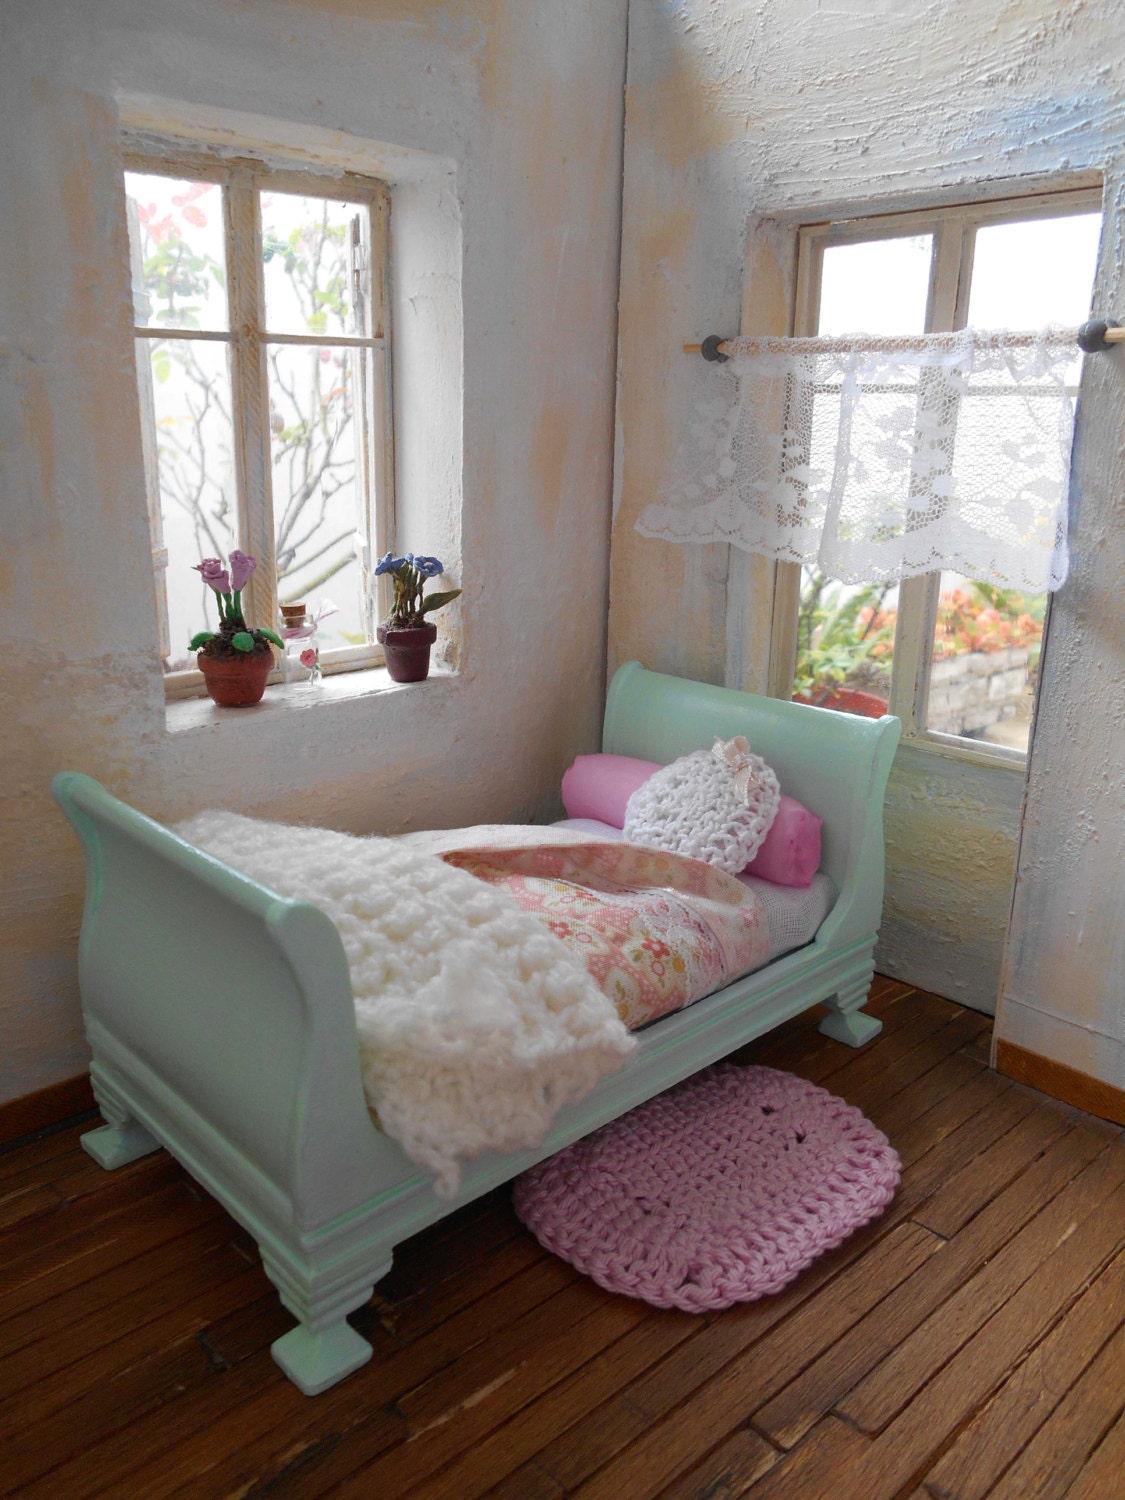 1/12 Sleigh bed Shabby chic style Cottage by ElartedeAngelina